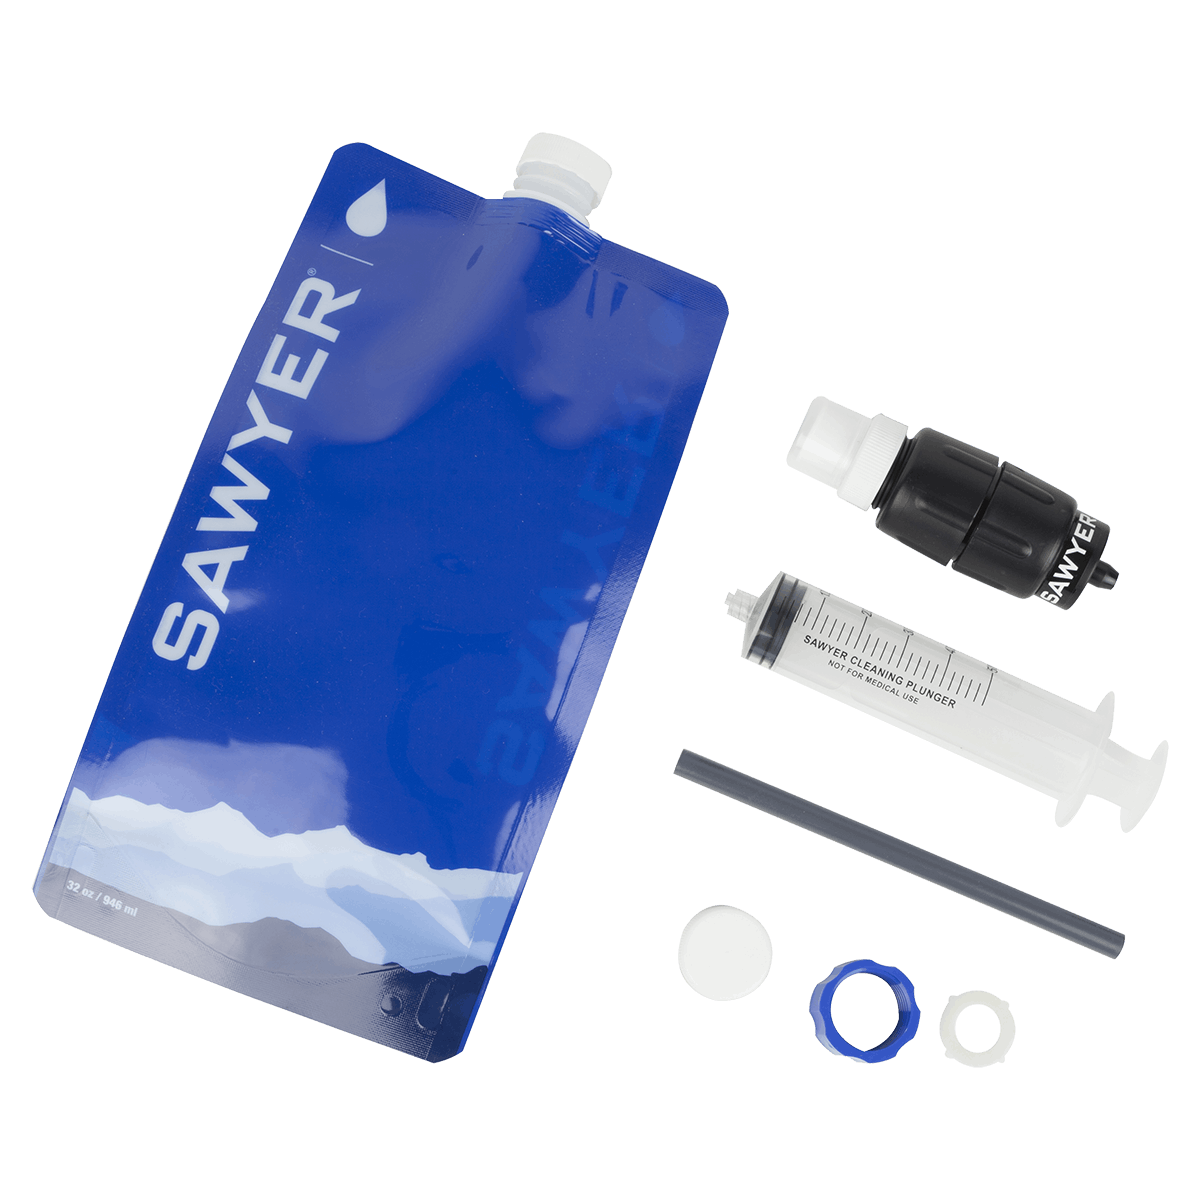 Product image of the Sawyer Micro Squeeze Water Filter and its components. 